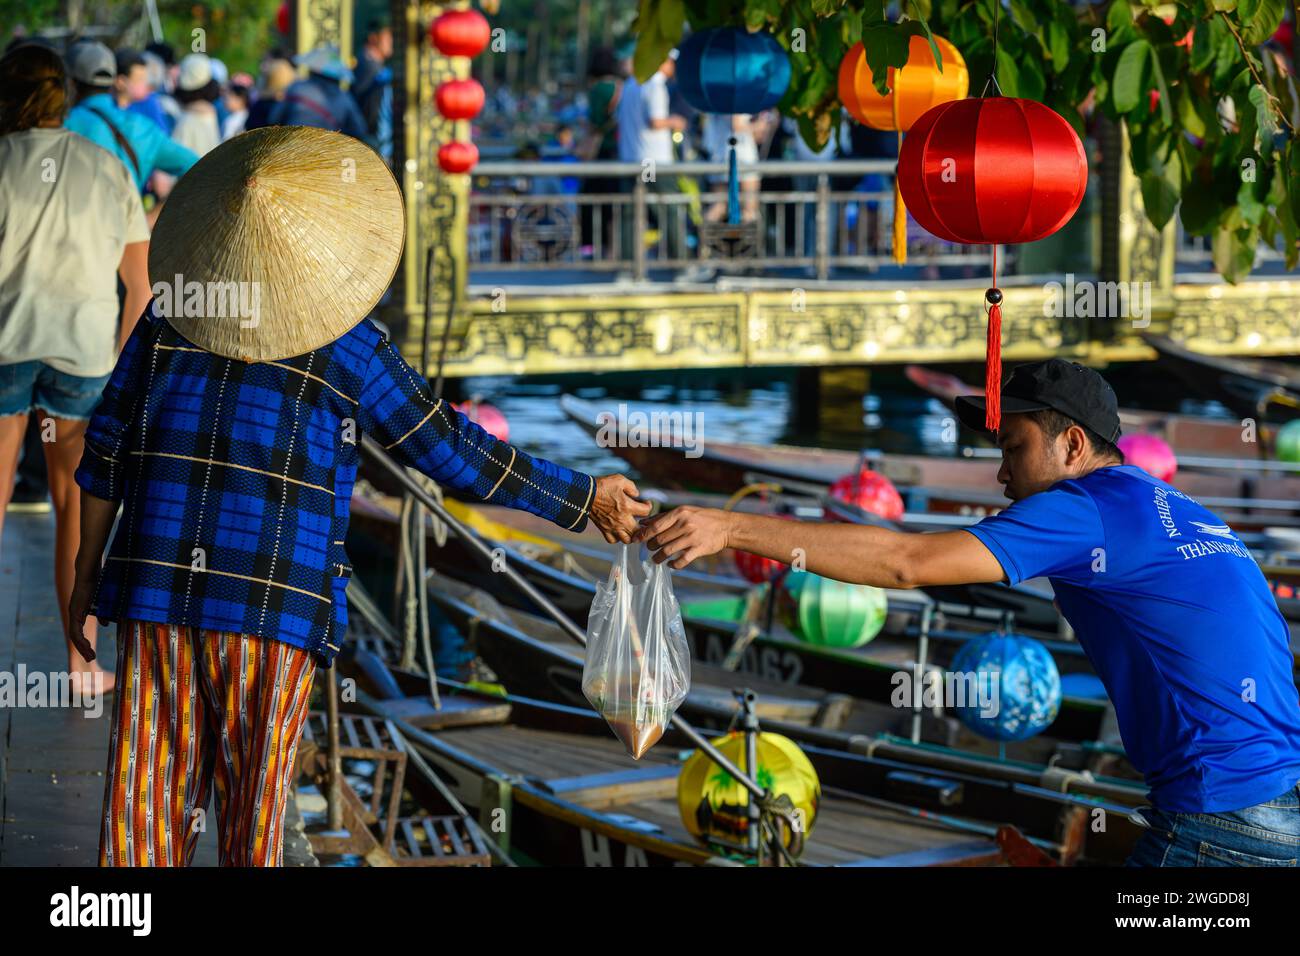 Food delivery Veitnamese style in Hoi An, Vietnam Stock Photo